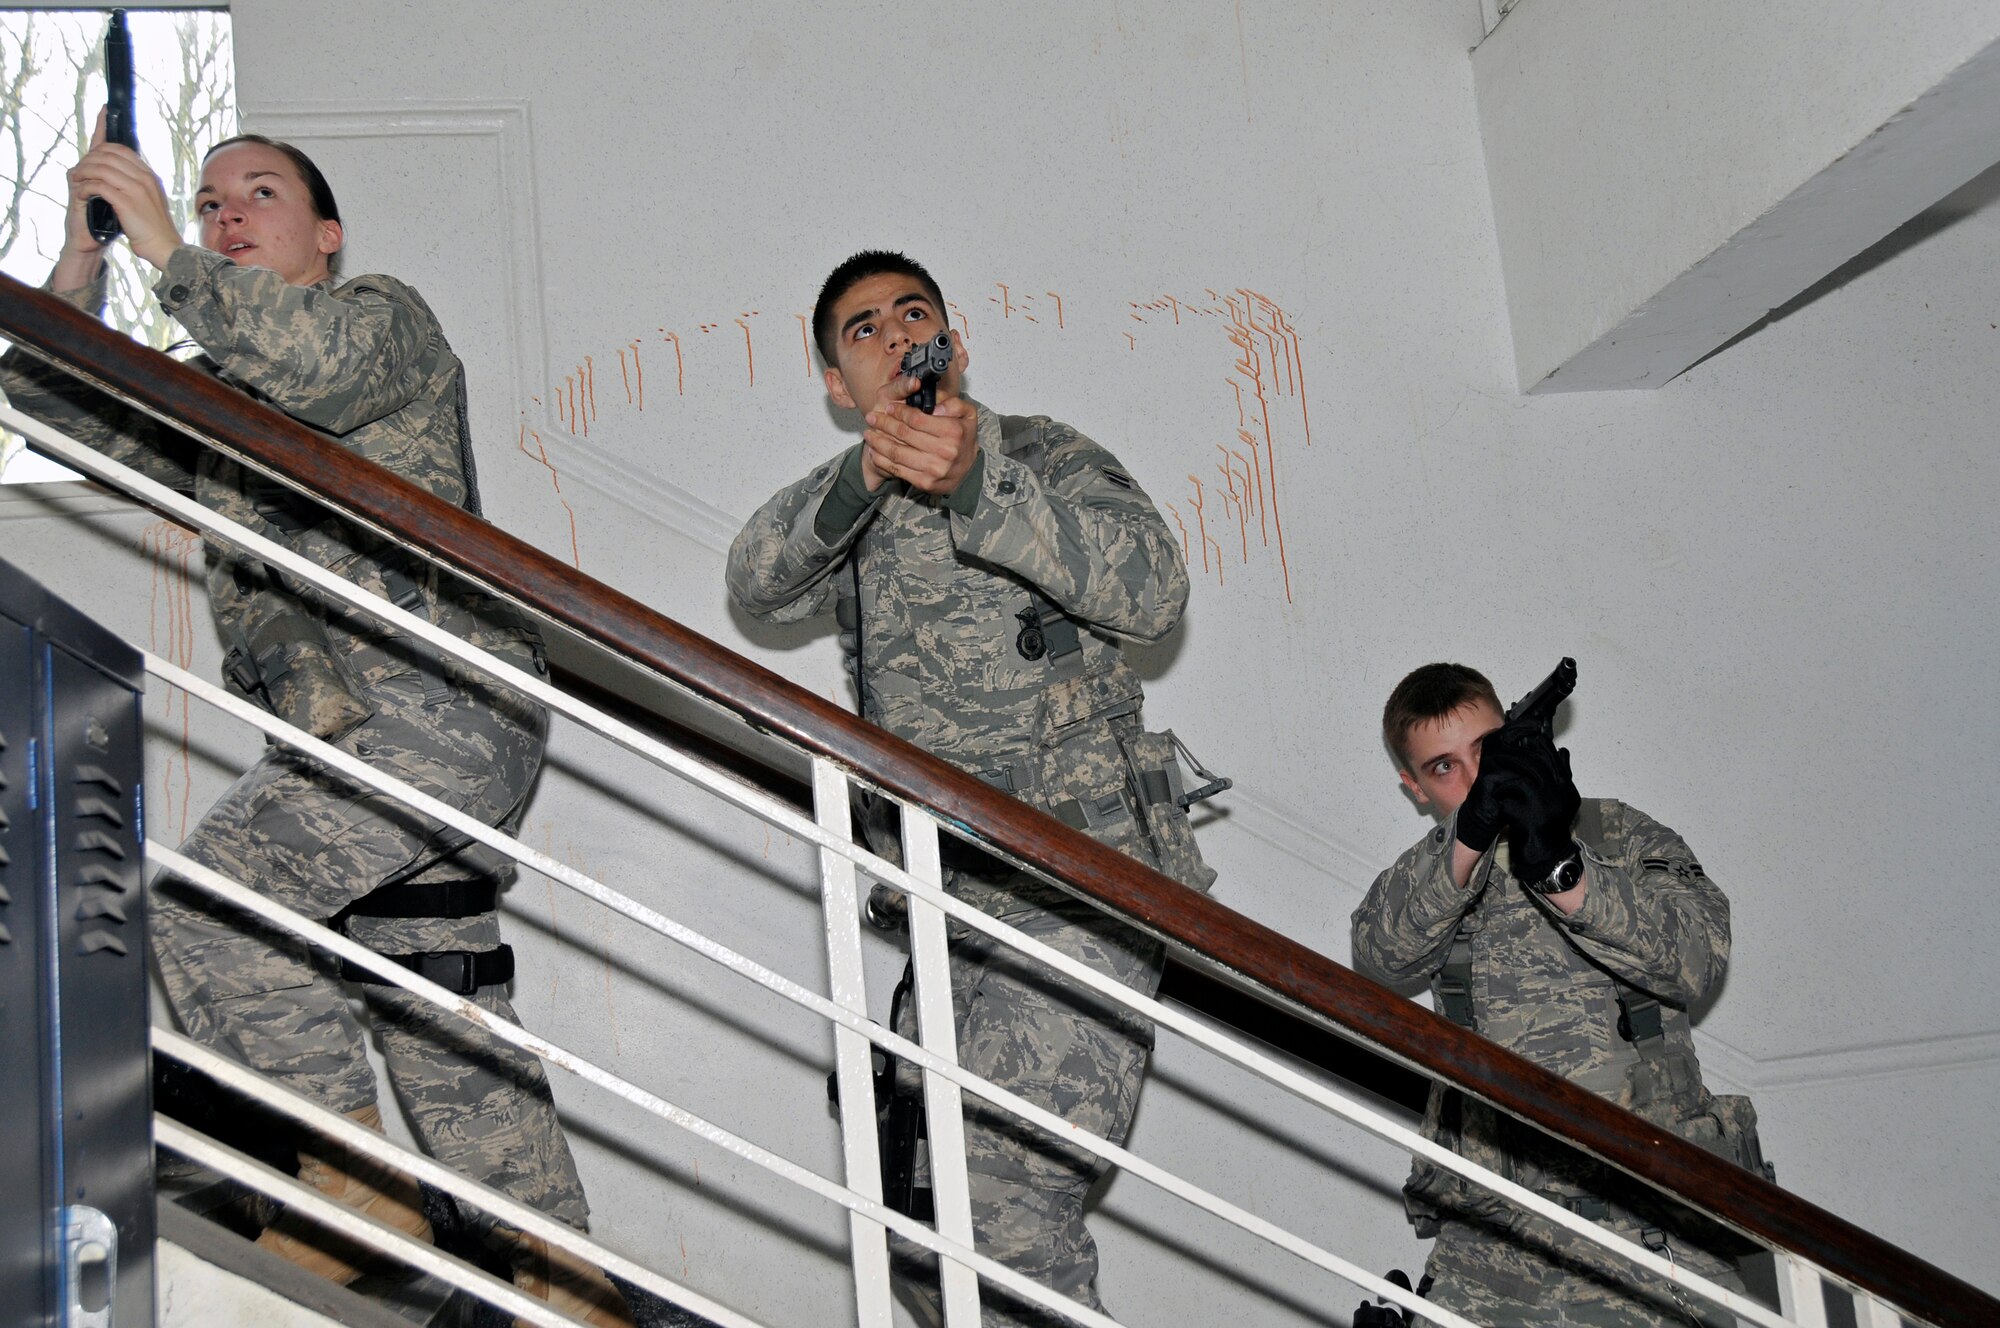 Airmen from the 48th Security Forces Squadron search for a simulated gunman that has barricaded himself inside an elementary school March 4, 2009 at RAF Feltwell, England. The Airmen are participating in an "Active Shooter" scenario which teaches security forces Airmen how to handle a school shooting. (U.S. Air Force photo by Airman 1st Class Perry Aston)